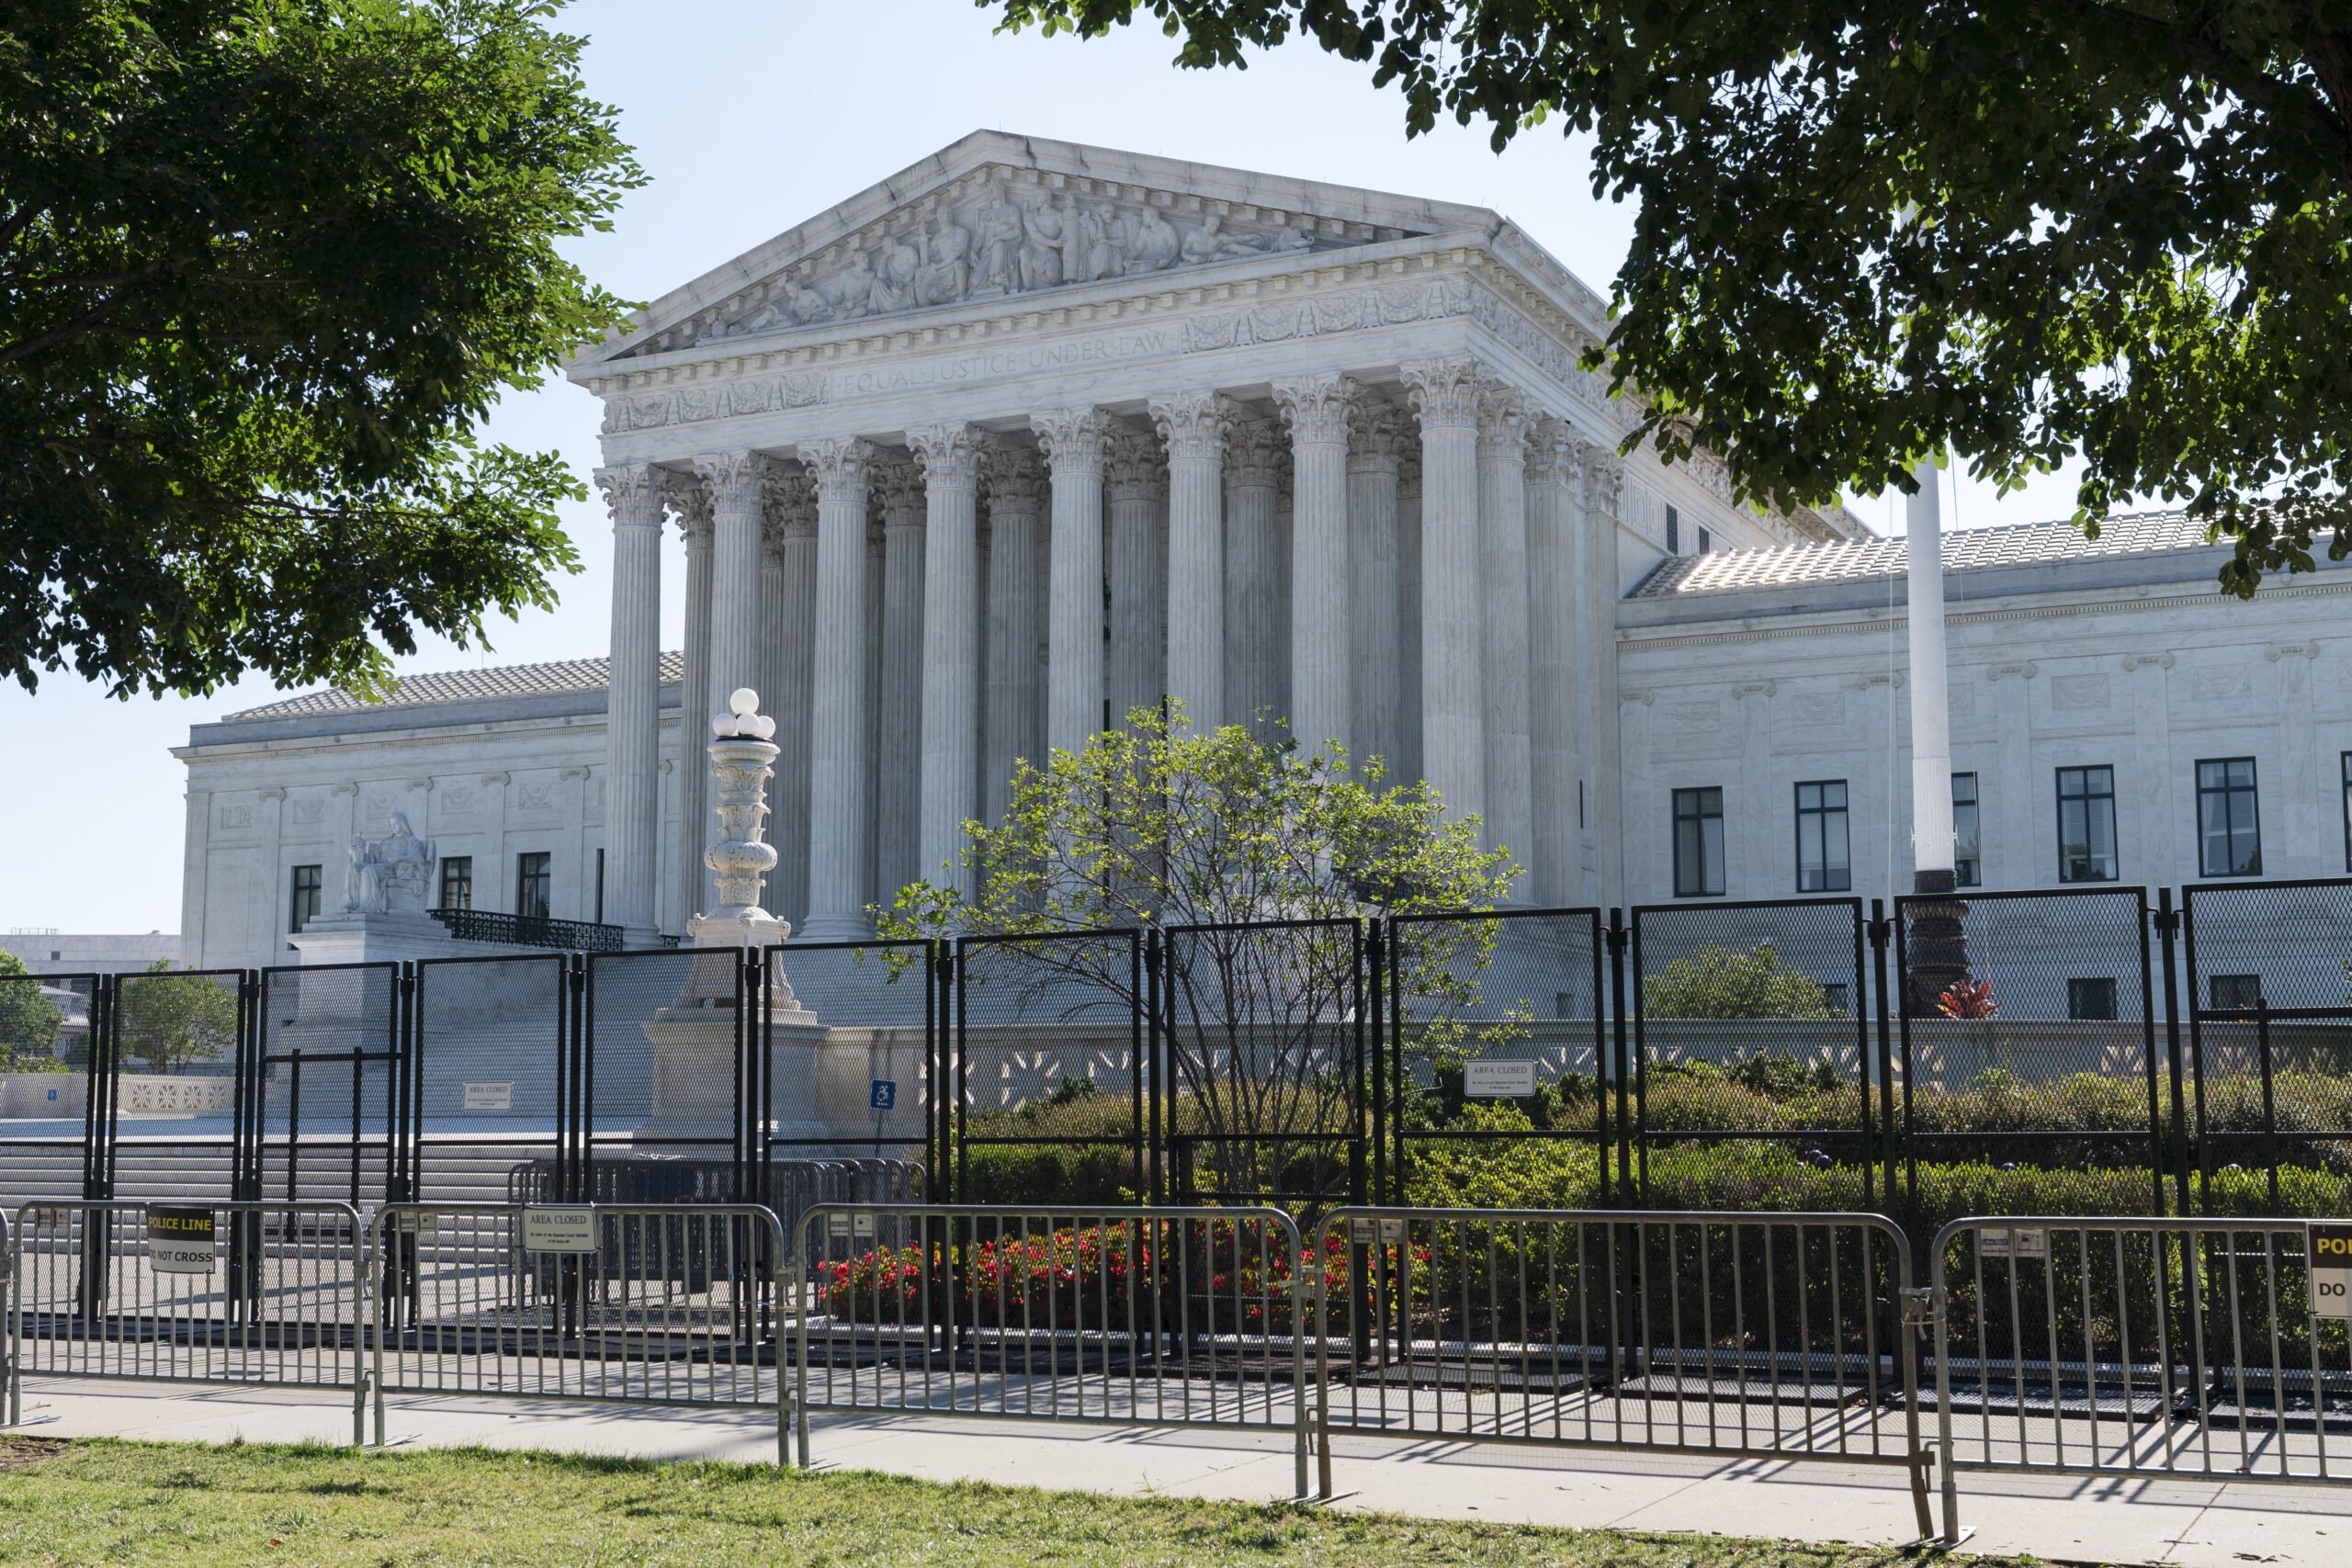 The Supreme Court is seen, Thursday, June 30, 2022, in Washington. The Supreme Court has ruled that the Biden administration properly ended a Trump-era policy forcing some U.S. asylum-seekers to wait in Mexico. The justices’ 5-4 decision for the administration came in a case about the “Remain in Mexico” policy under President Donald Trump. (AP Photo/Jacquelyn Martin)